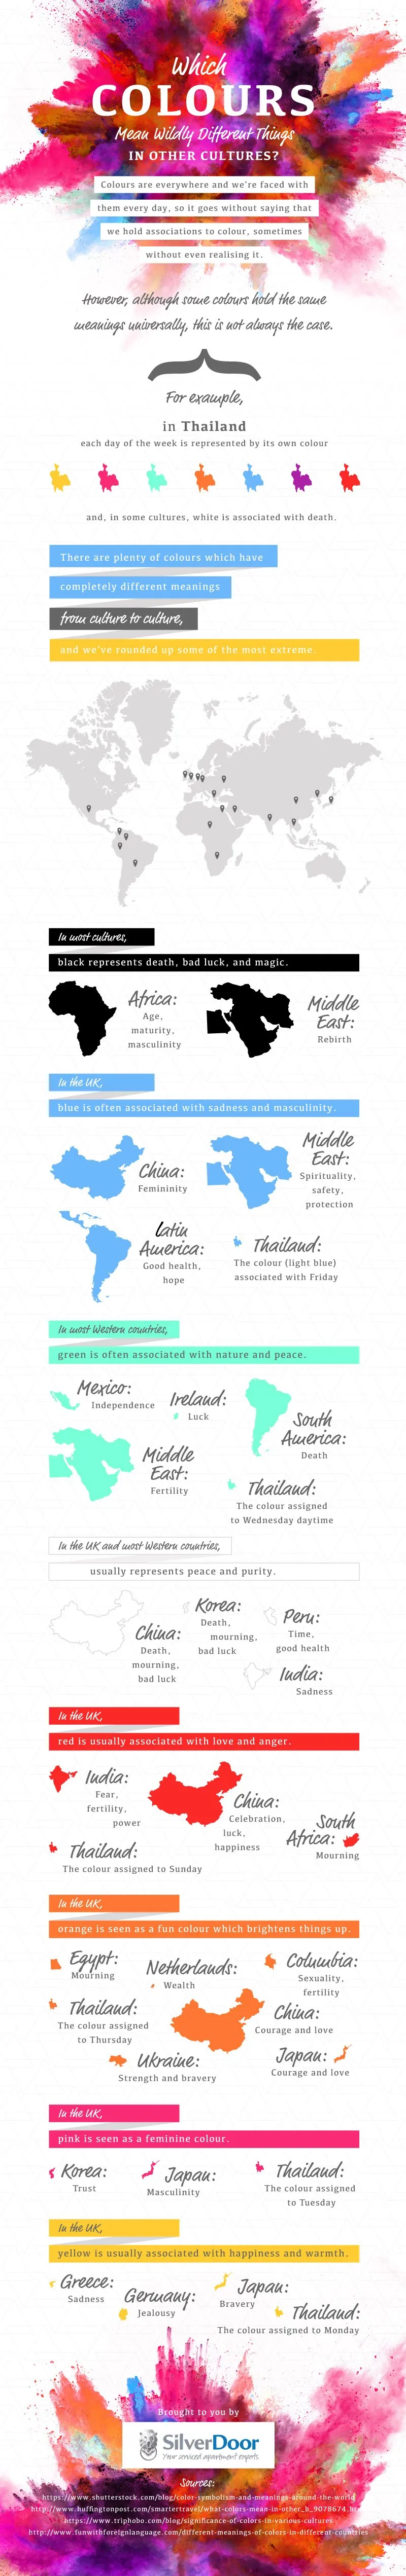 Which Colours Mean Wildly Different Things In Other Cultures? - #Infographic